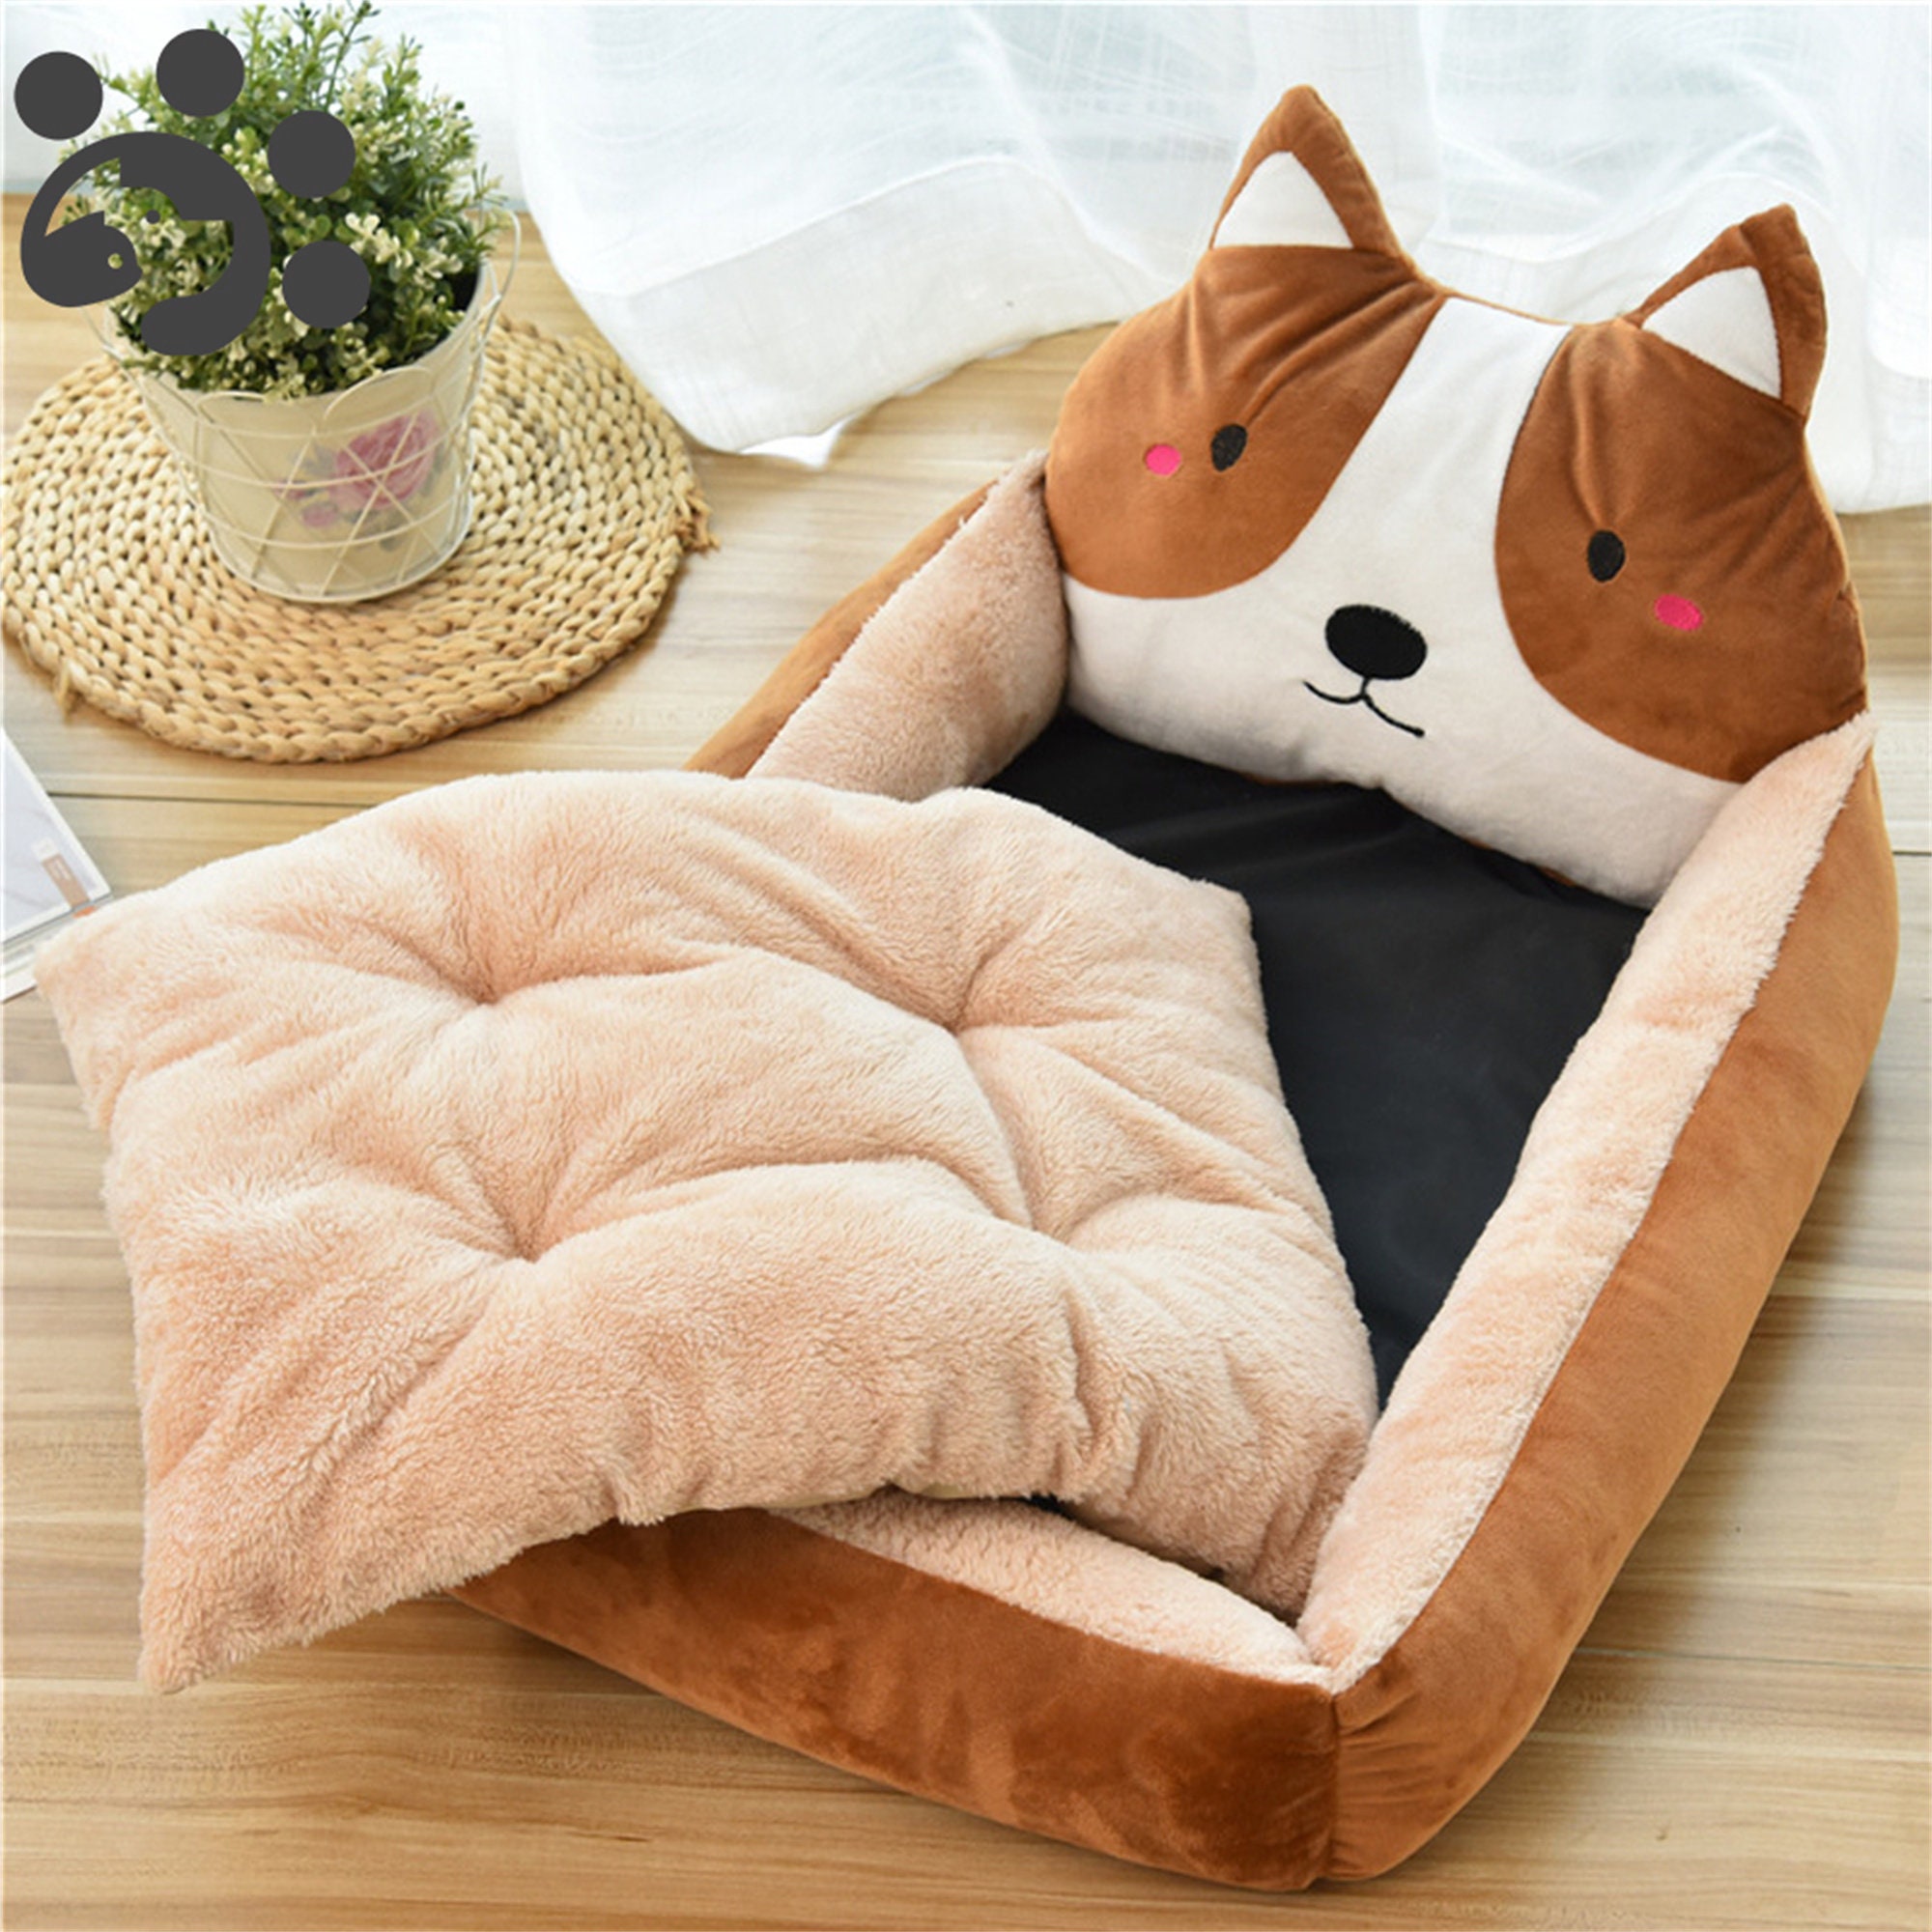 WhiteBrown Washer and Dryer Friendly TONBO Soft Plush 24 Cute and Cozy Cinnamon Roll Dog Cat Bed